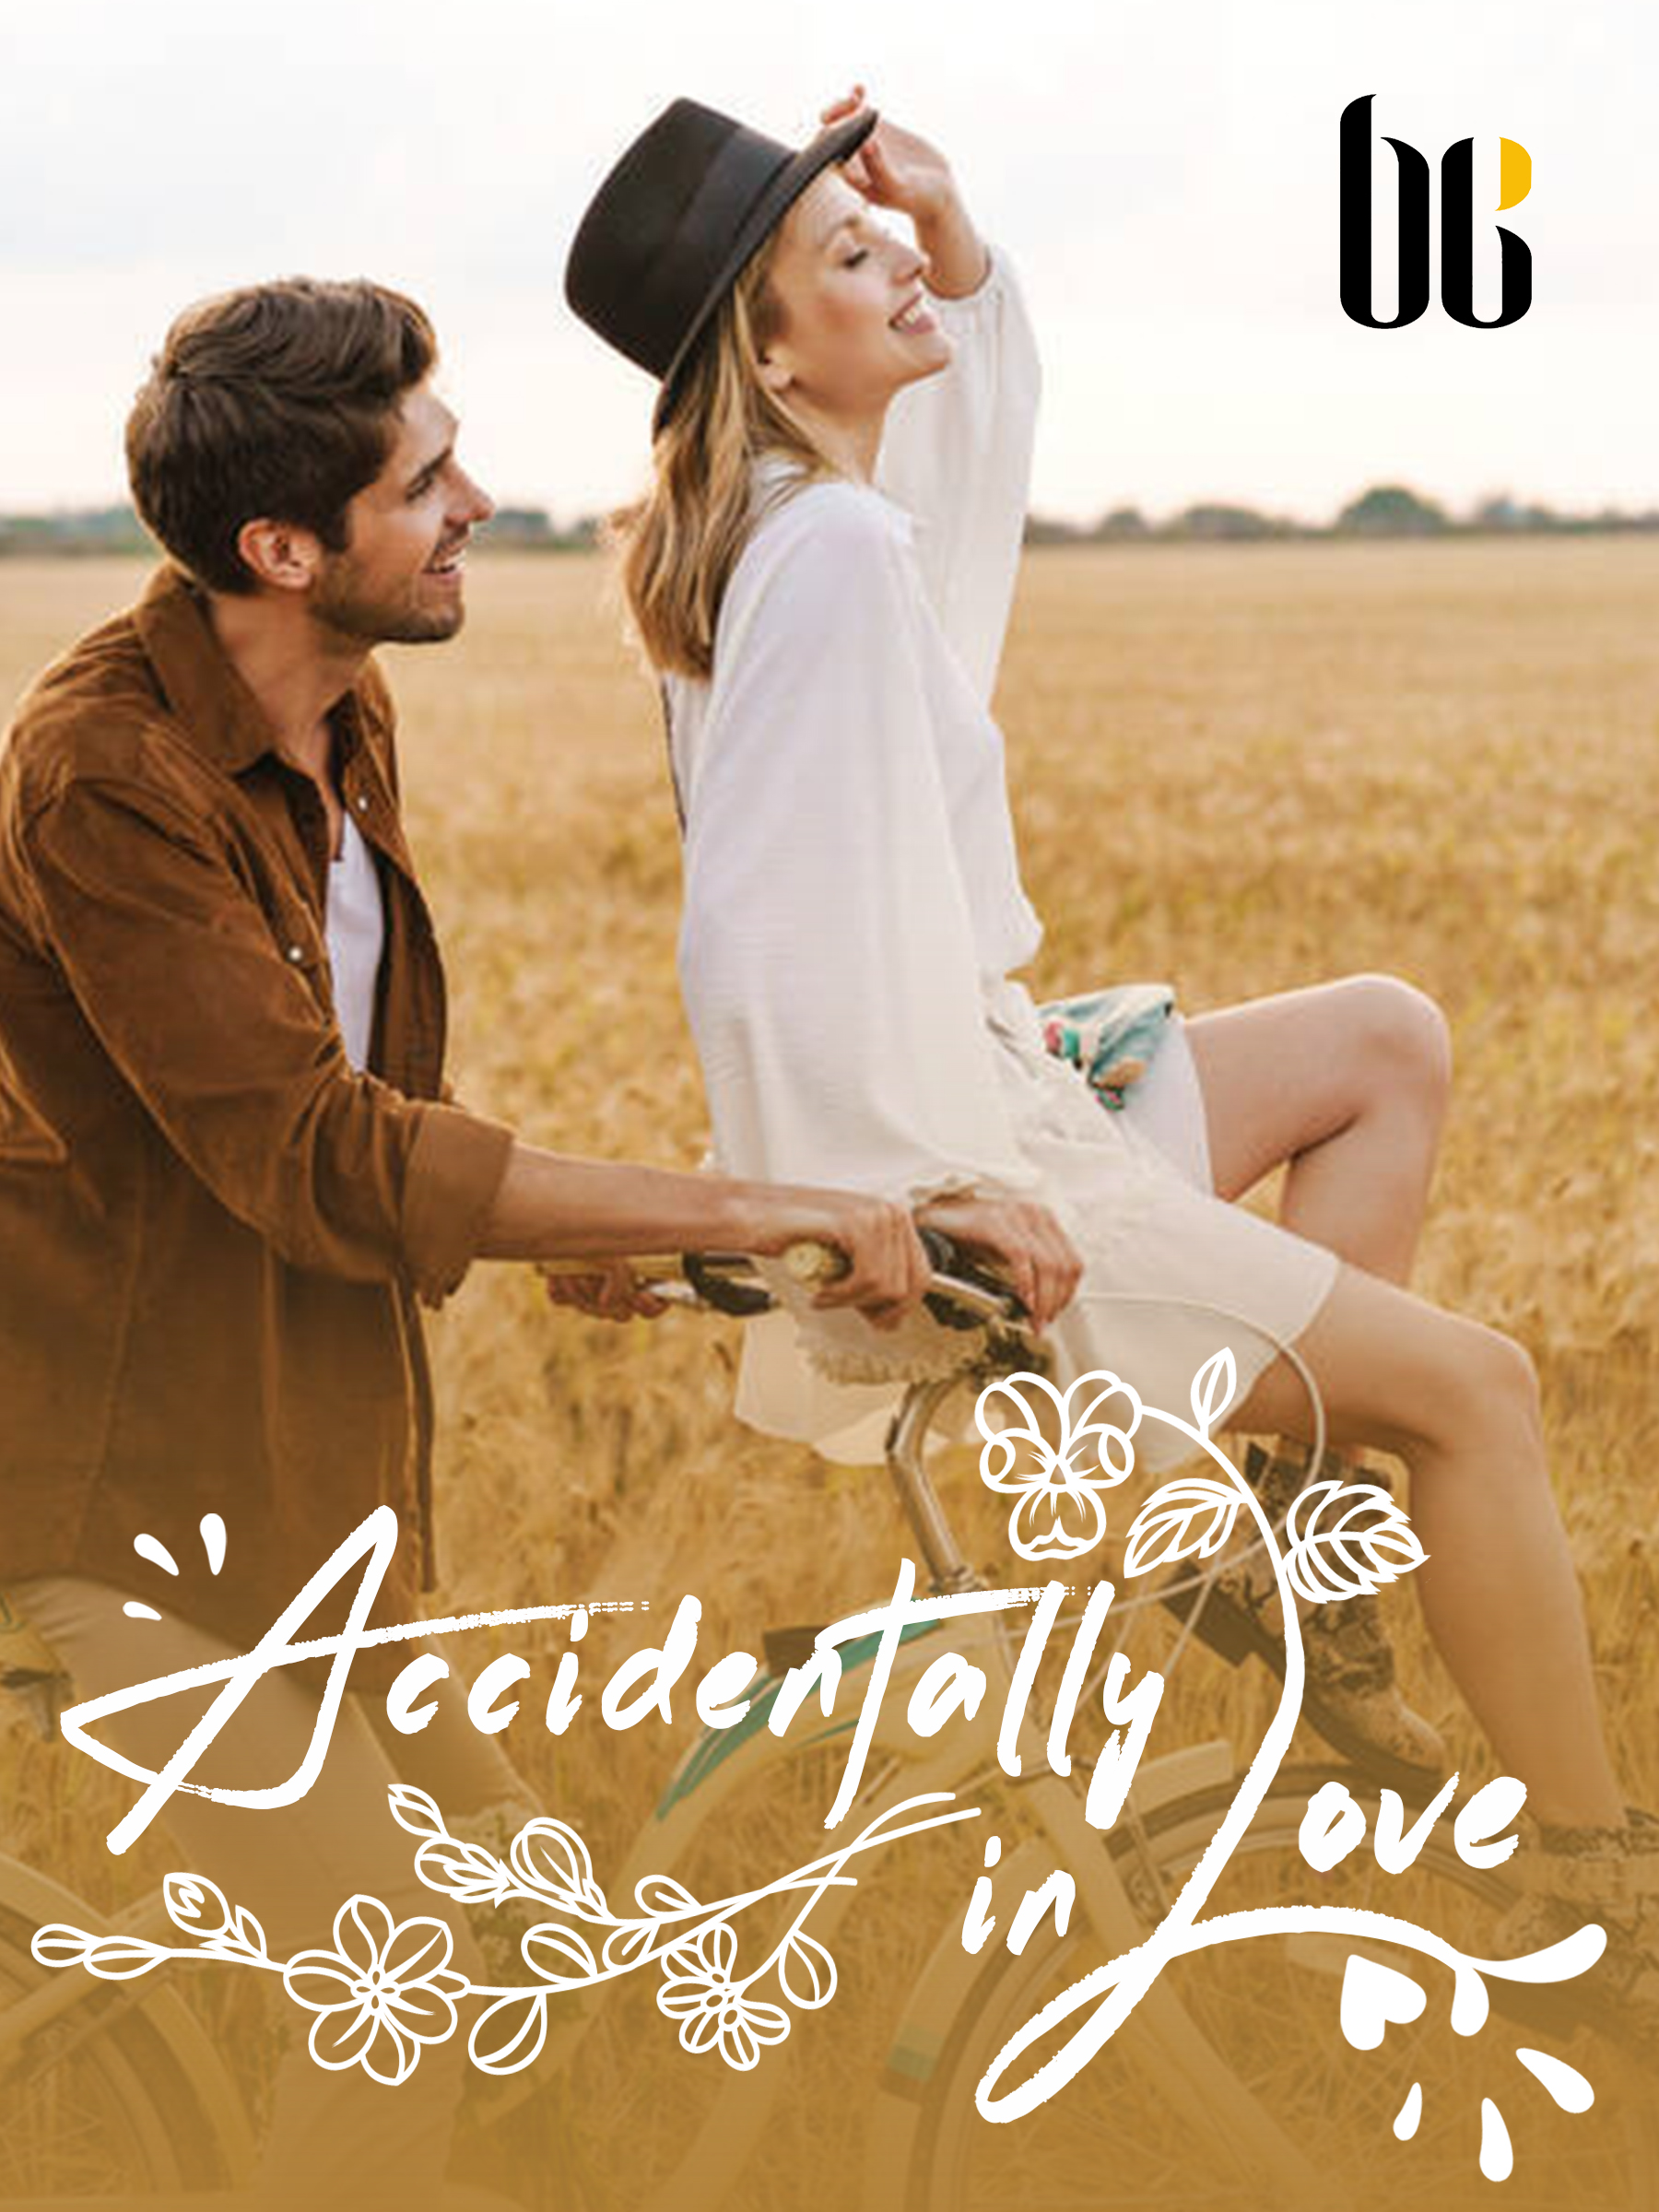 accidentally in love with him again pdf free download